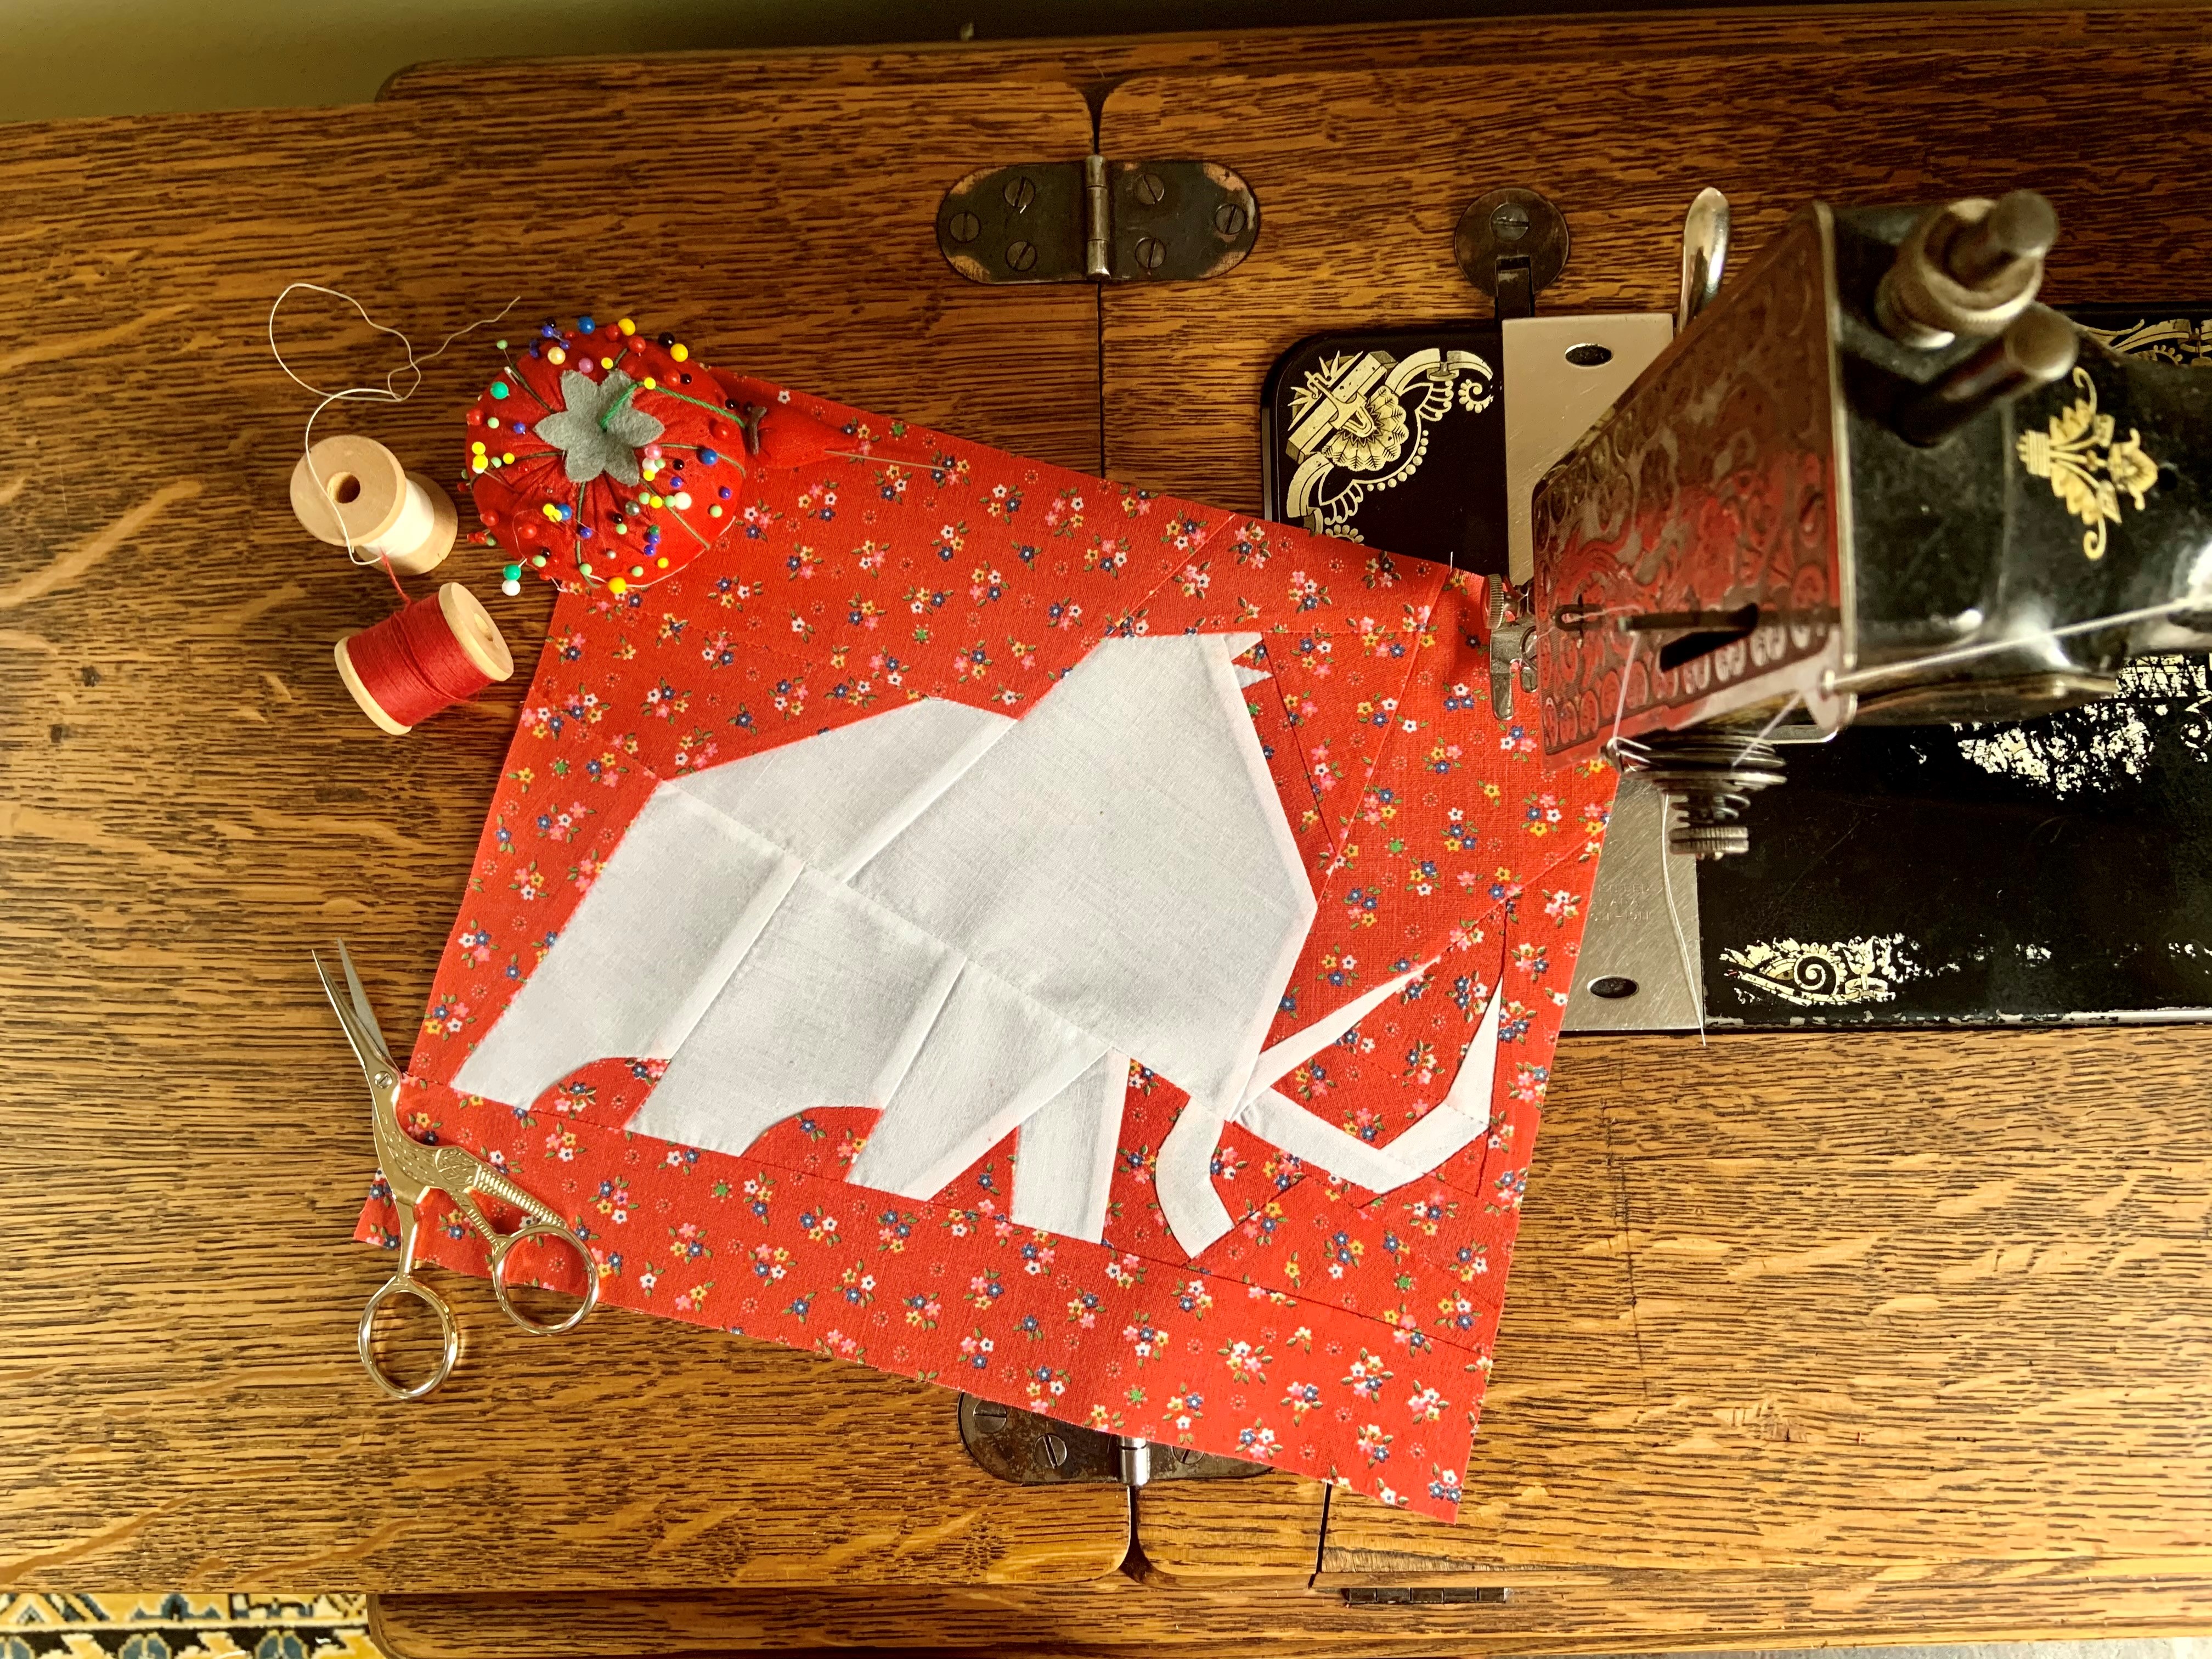 A quilted piece of fabric depicting a white mammoth lays on a wooden table next to an antique sewing machine, thread, scissors and sewing pins.